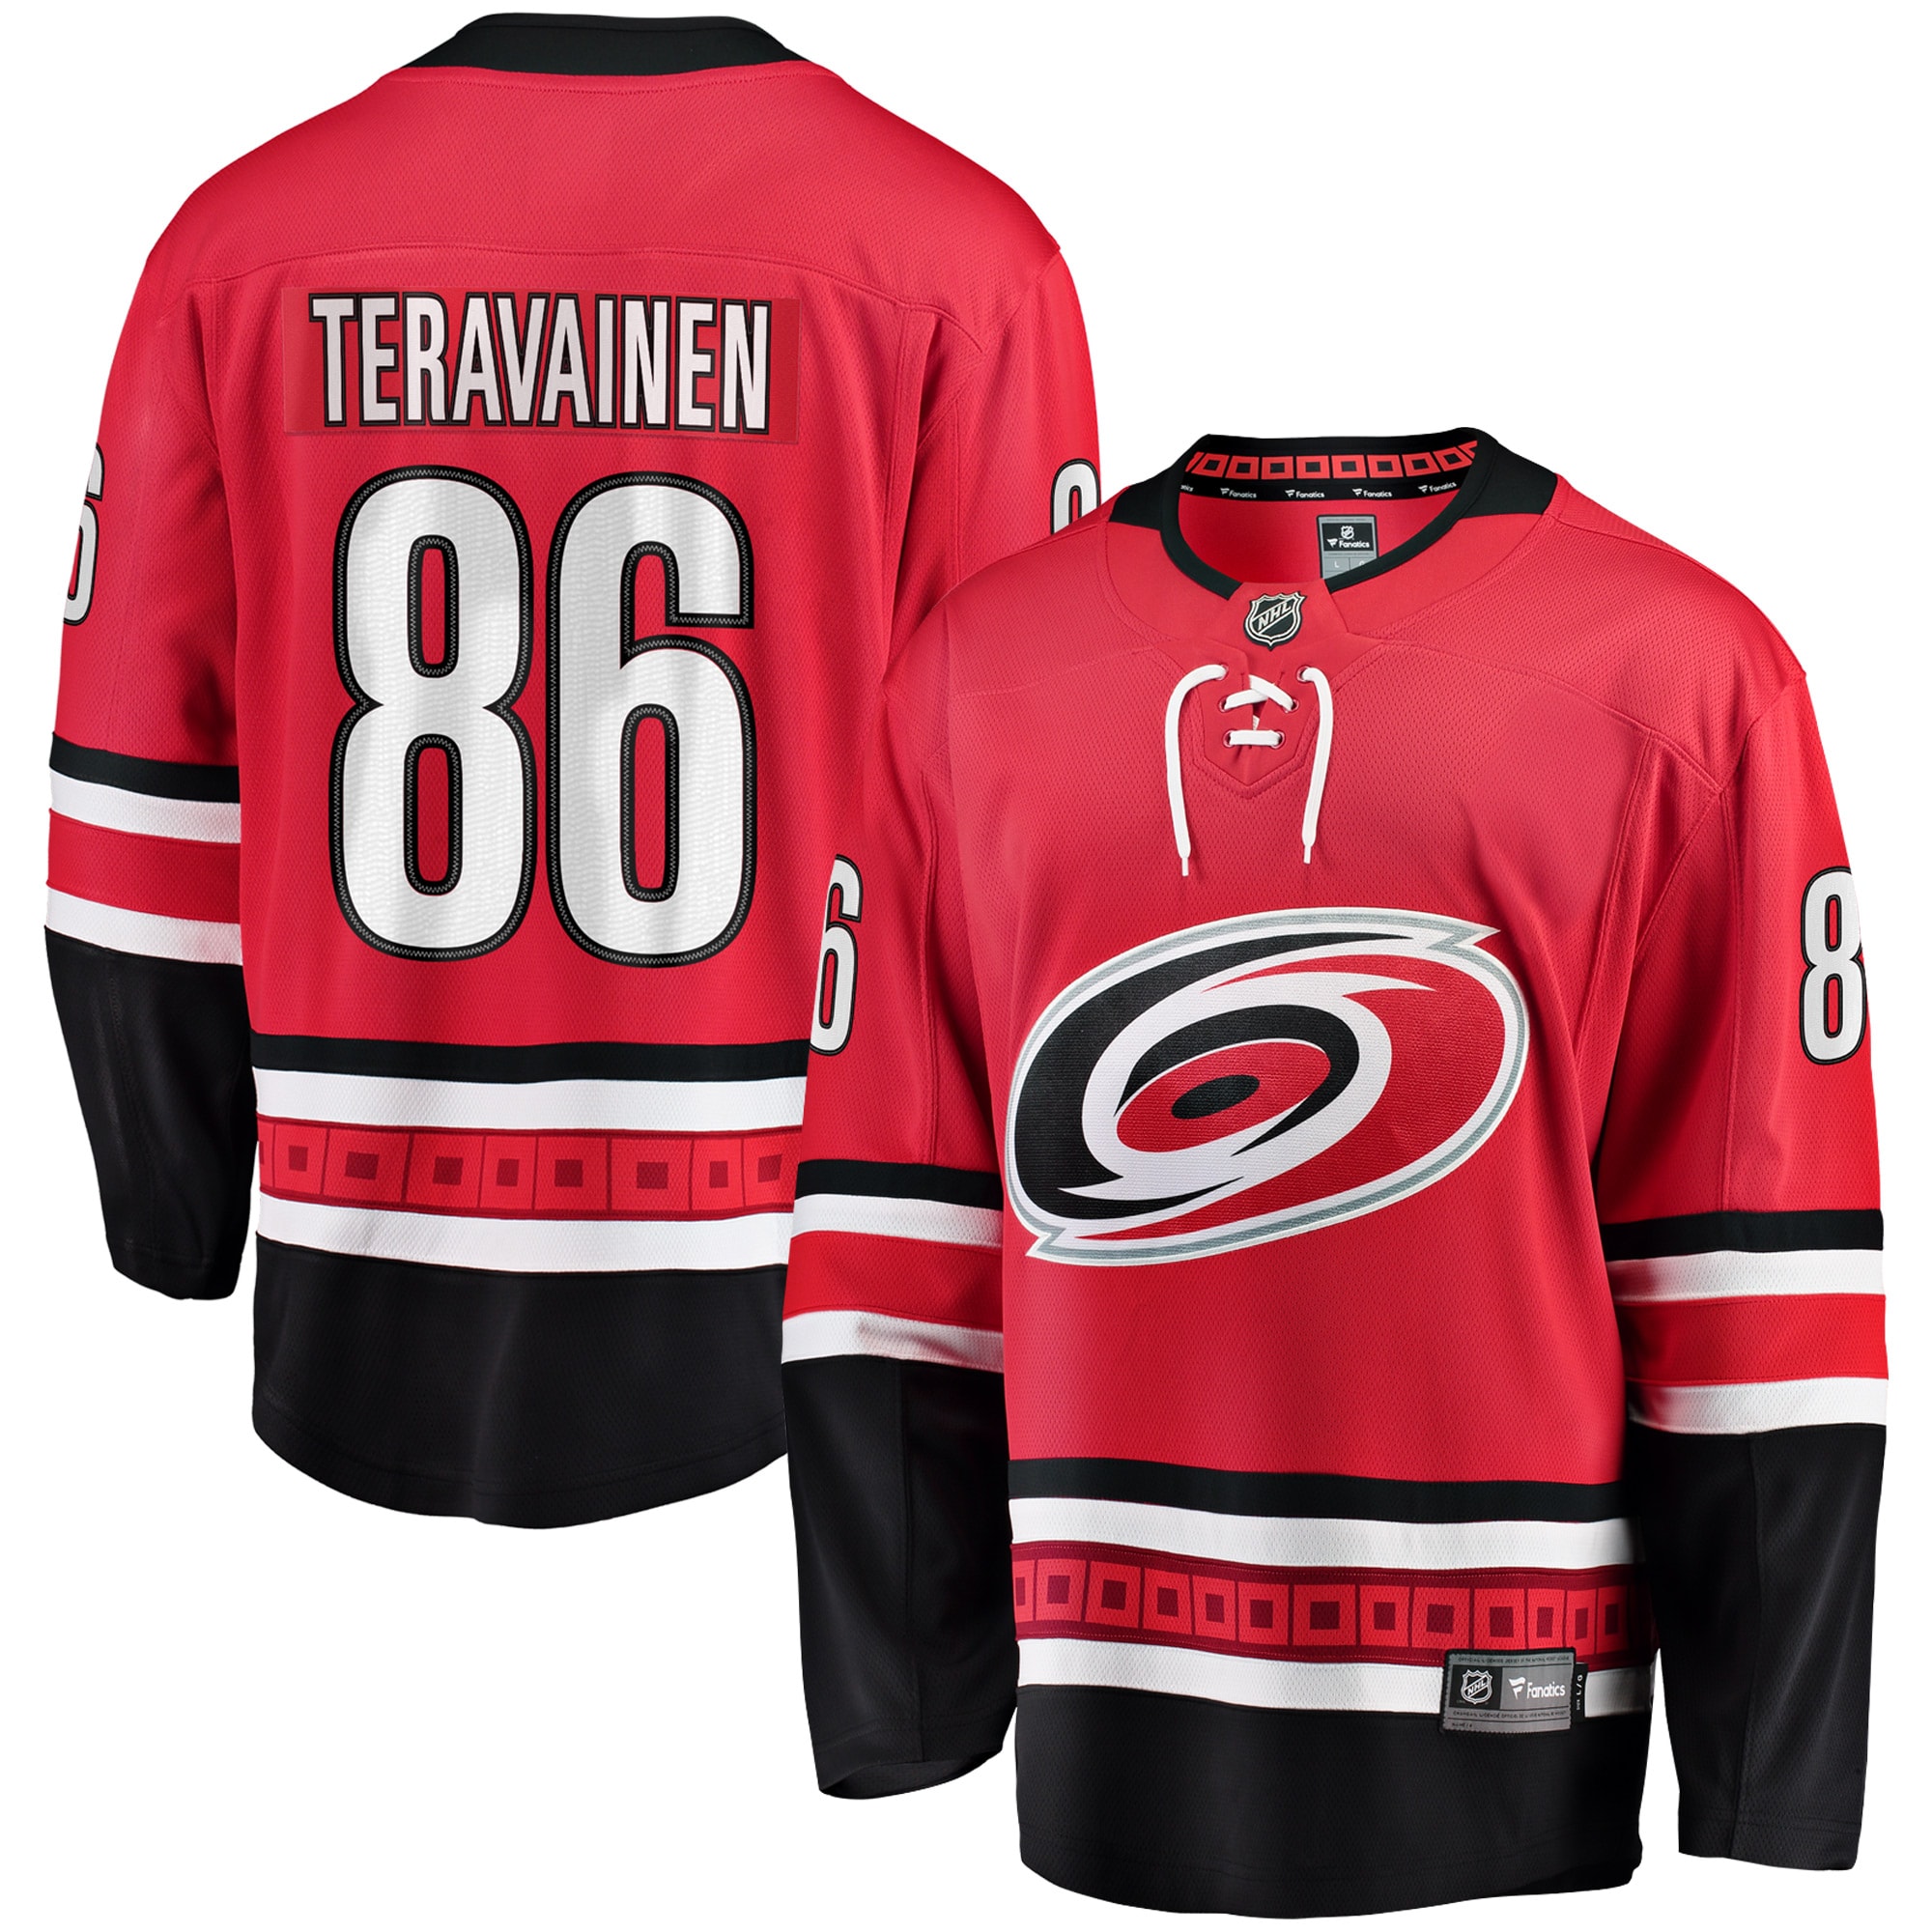 teuvo teravainen youth jersey